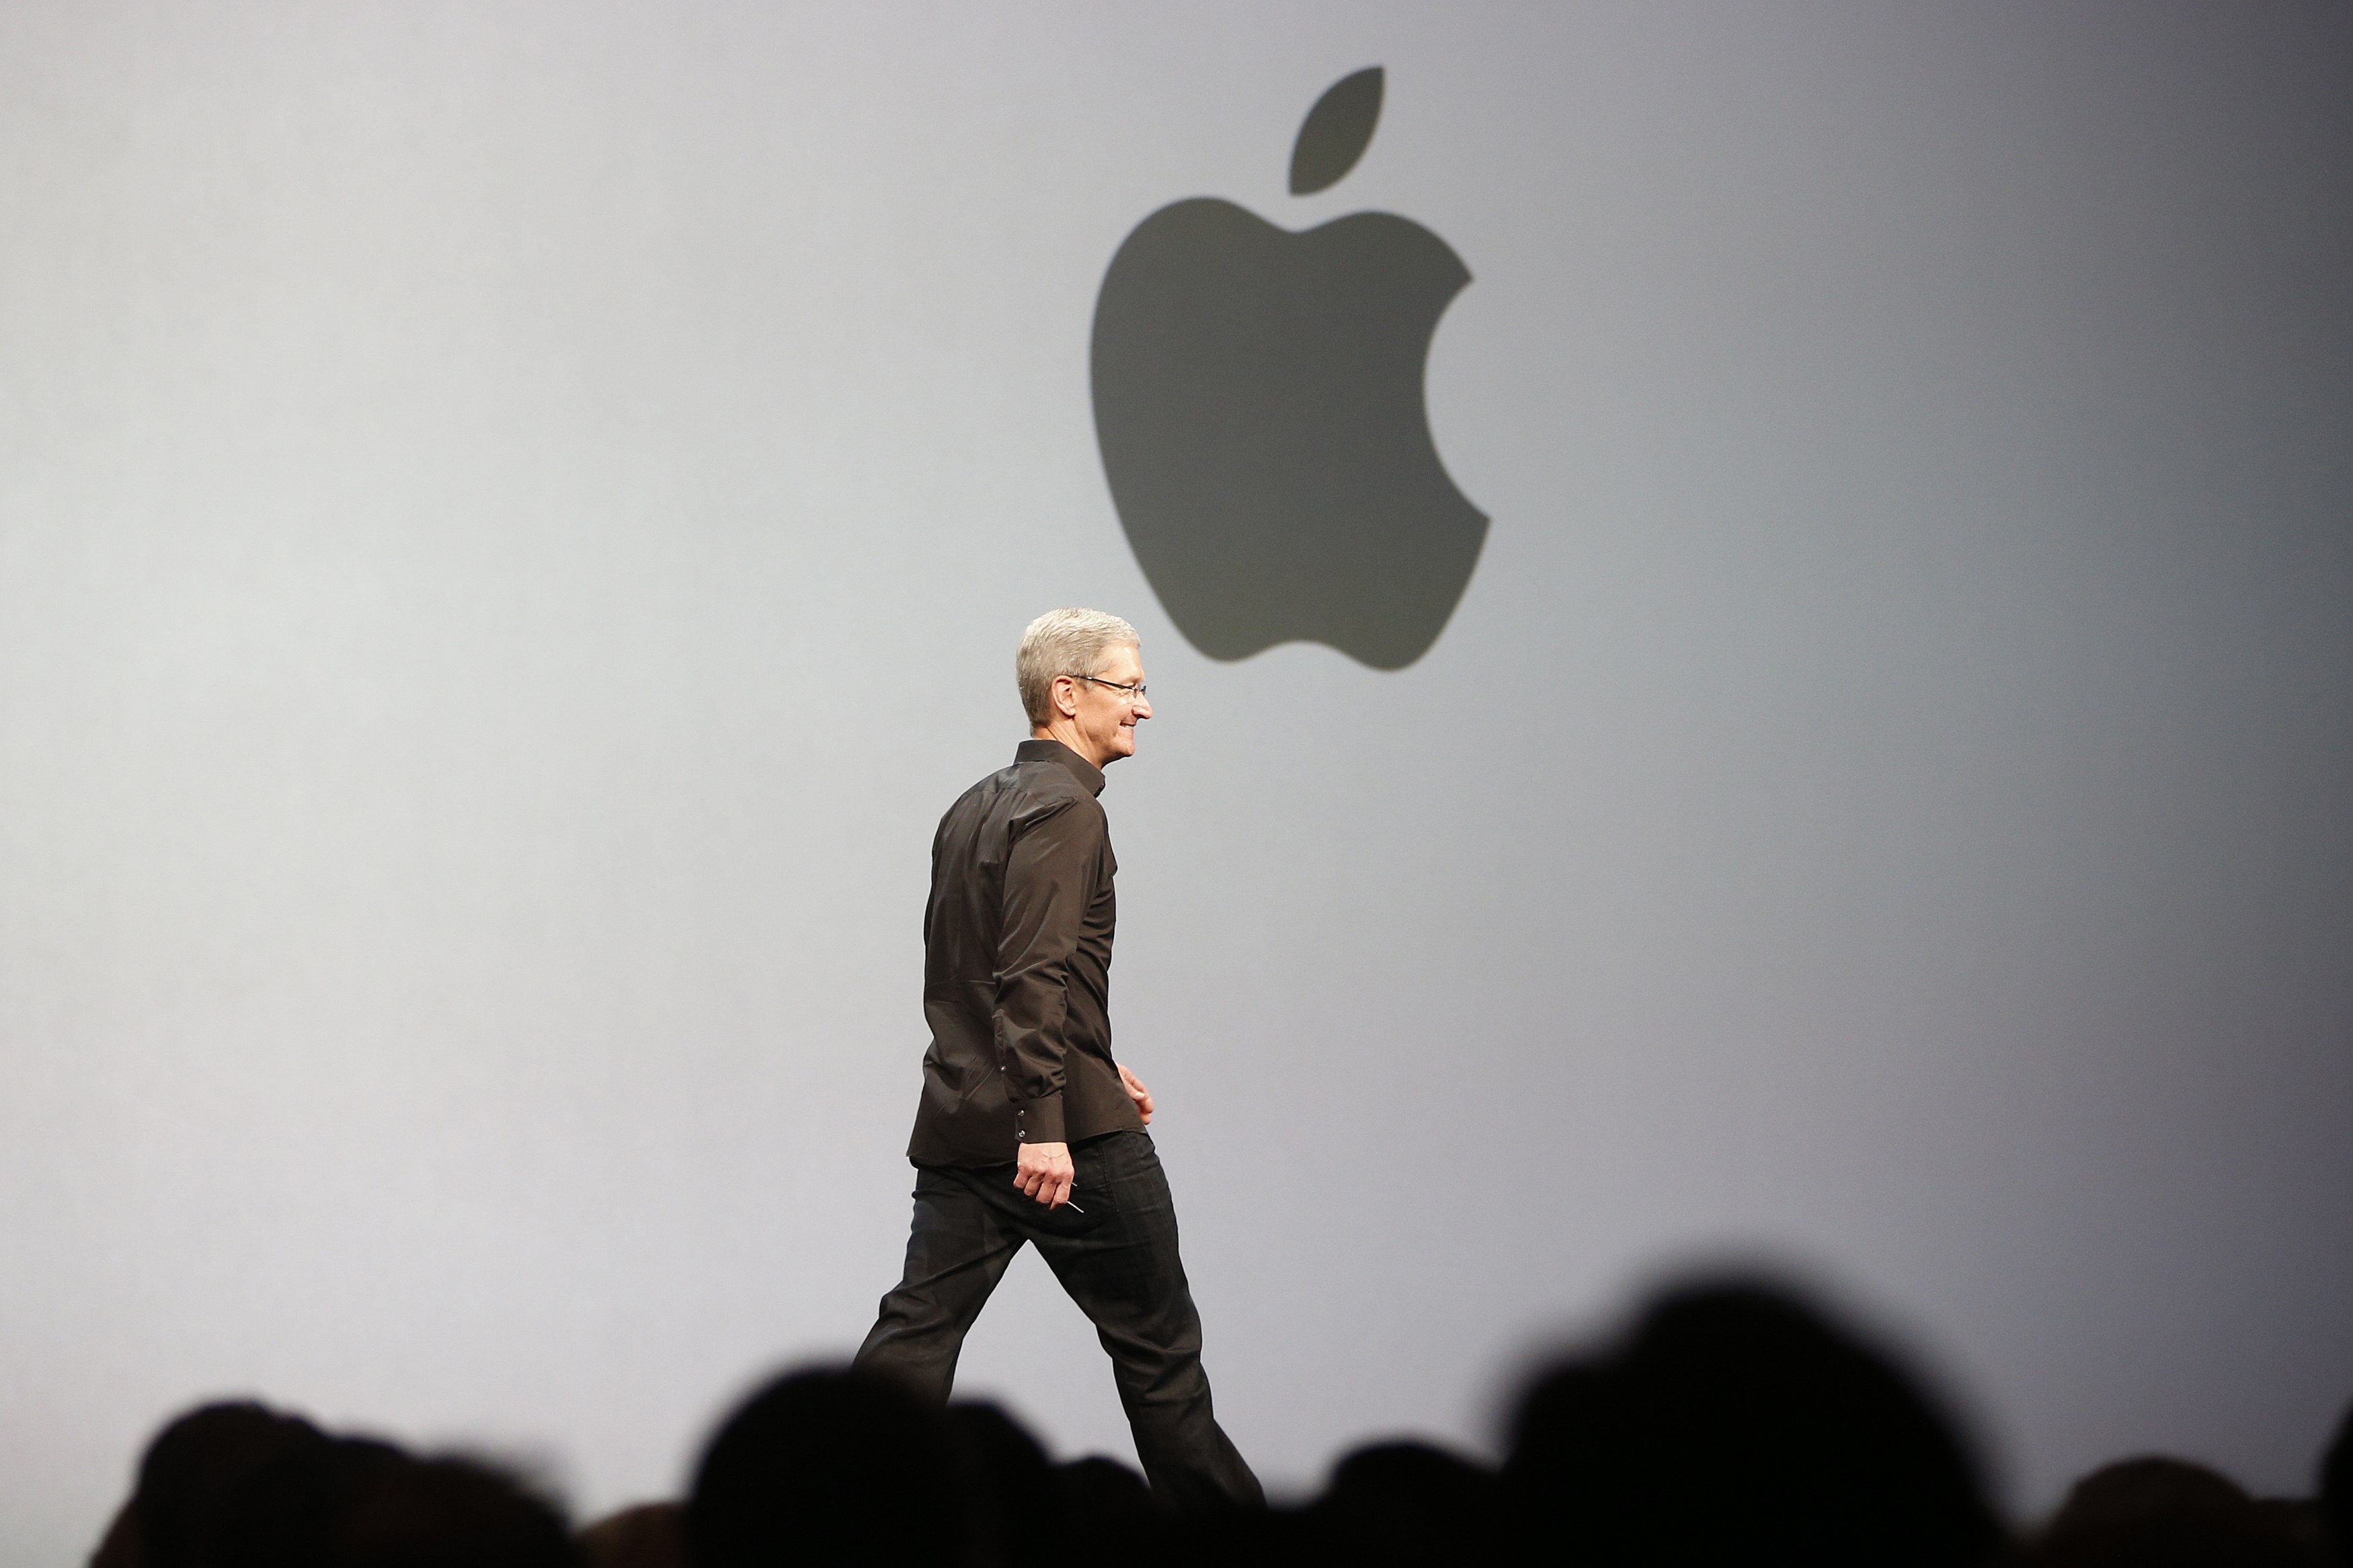 Apple CEO Cook takes stage during WWDC 2013 in San Francisco